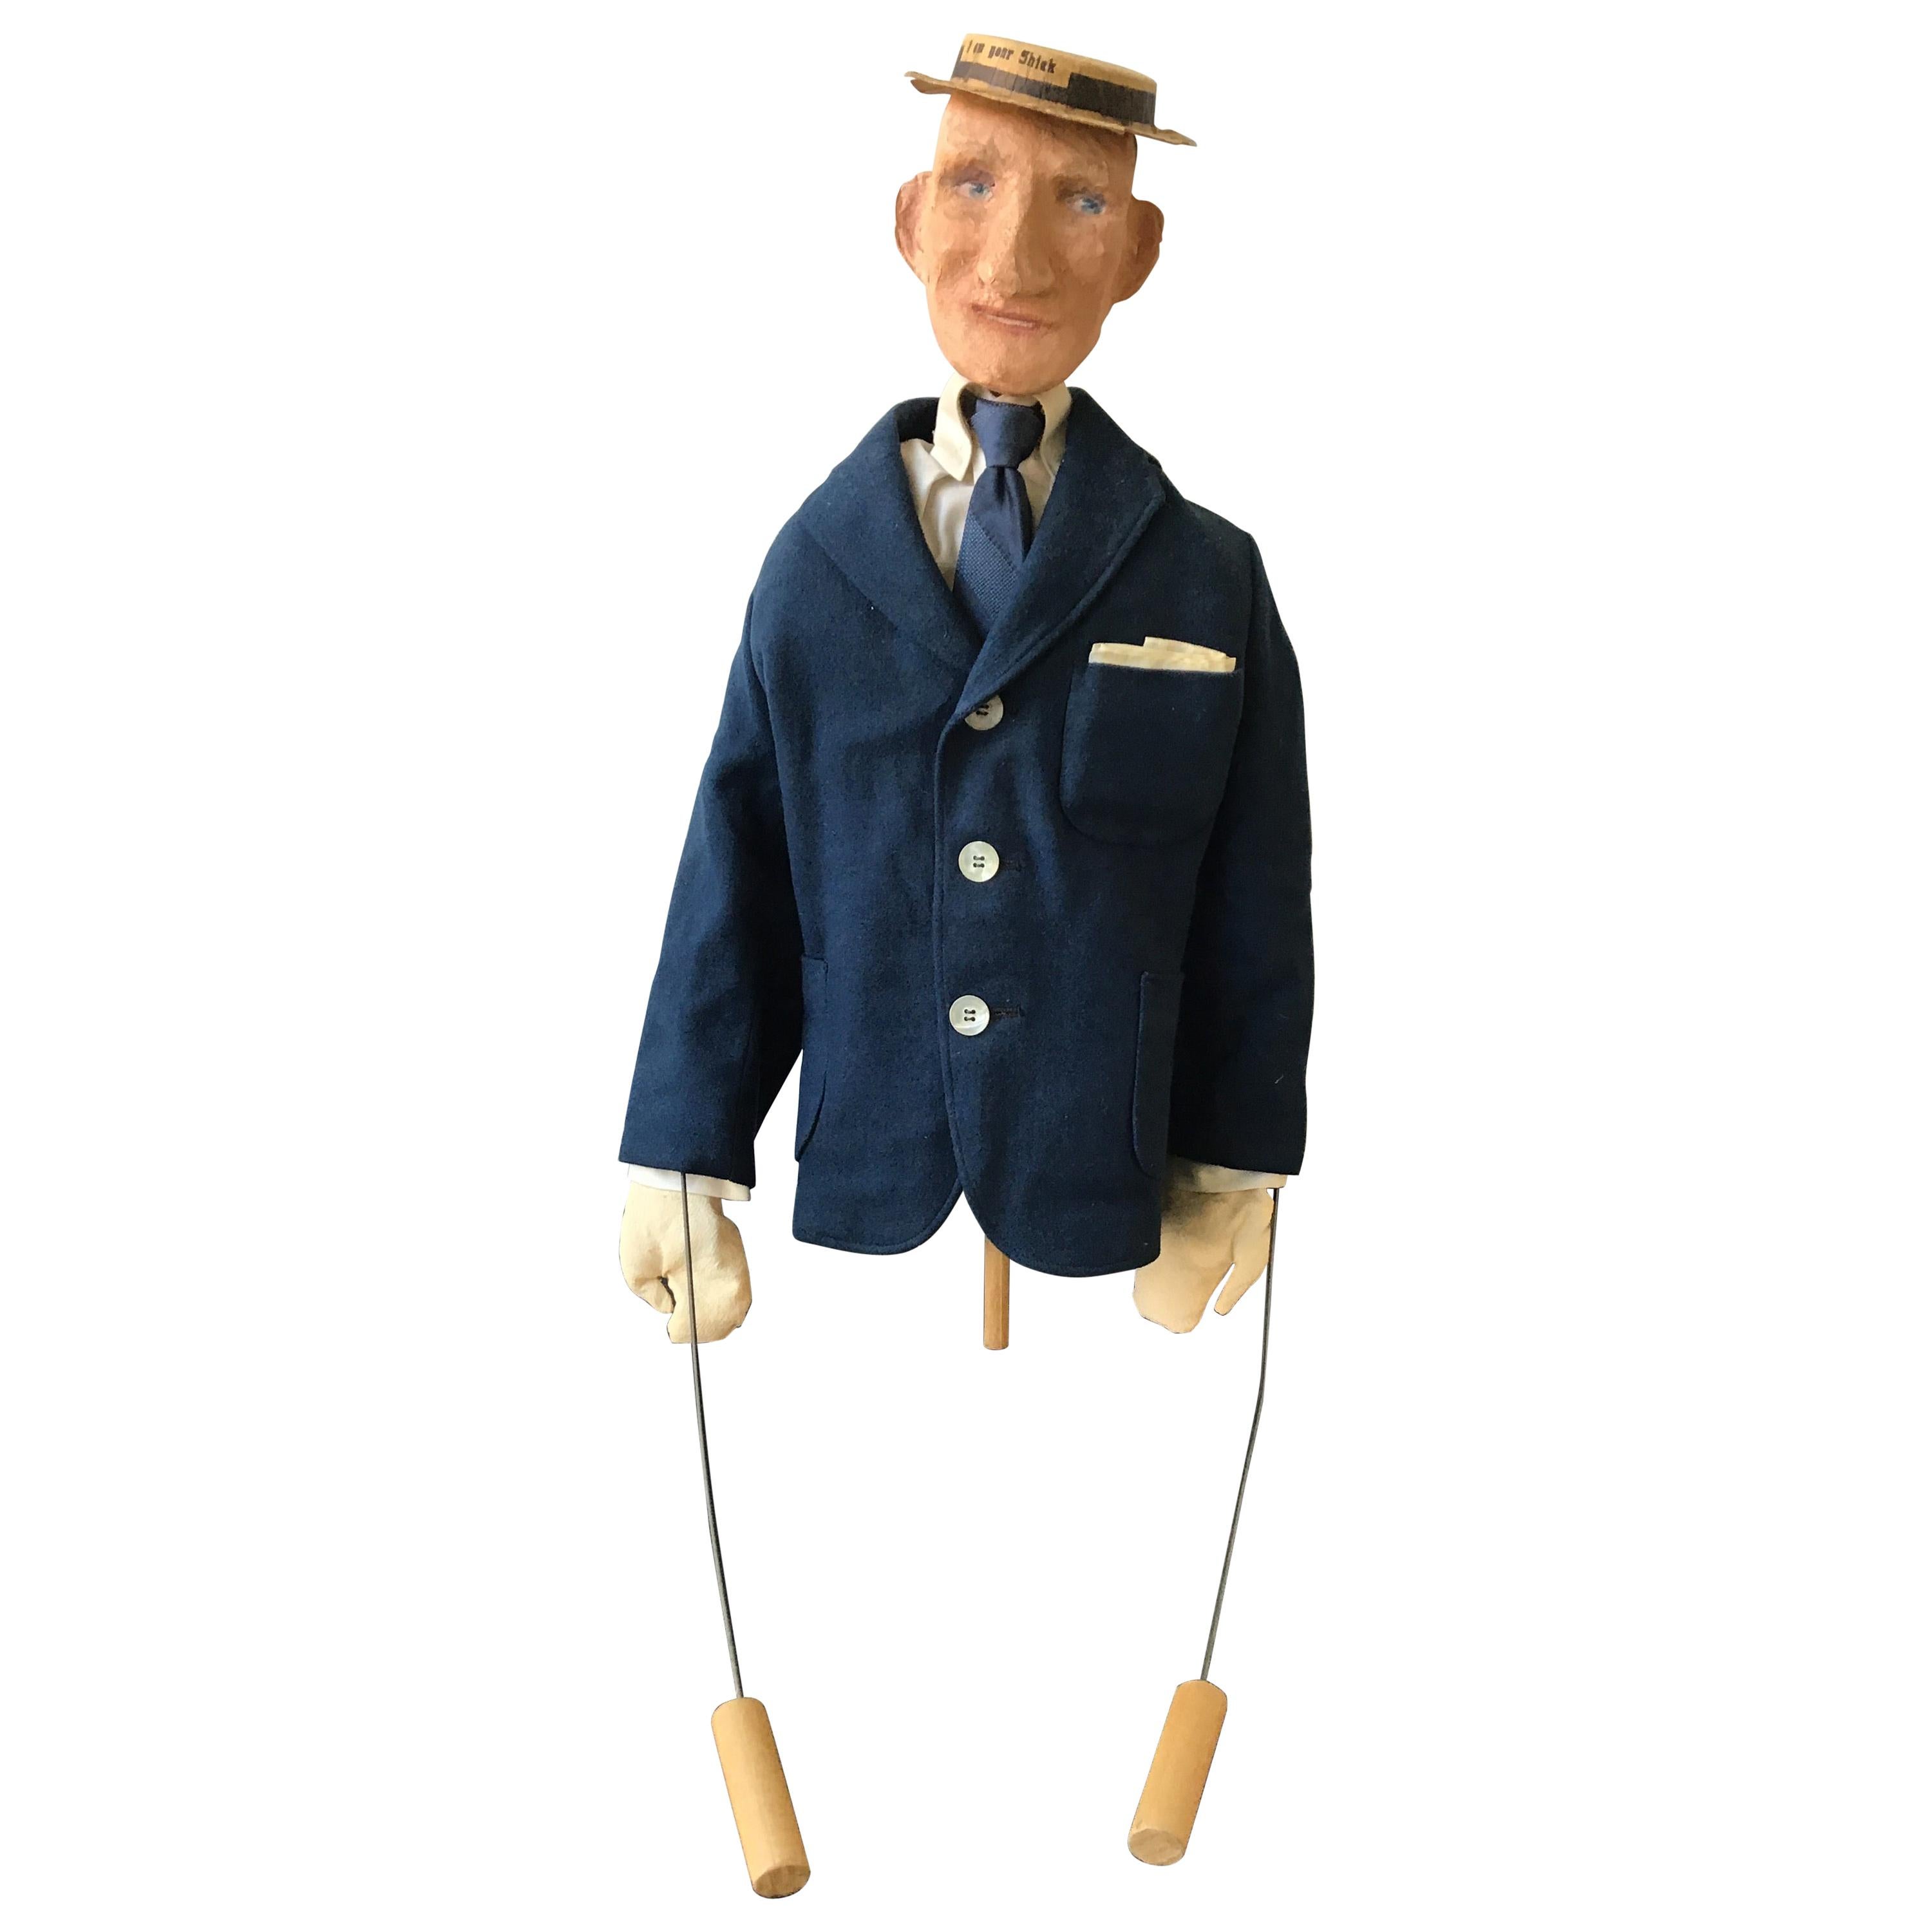 1950s Paper Mache Puppet For Sale At 1stdibs